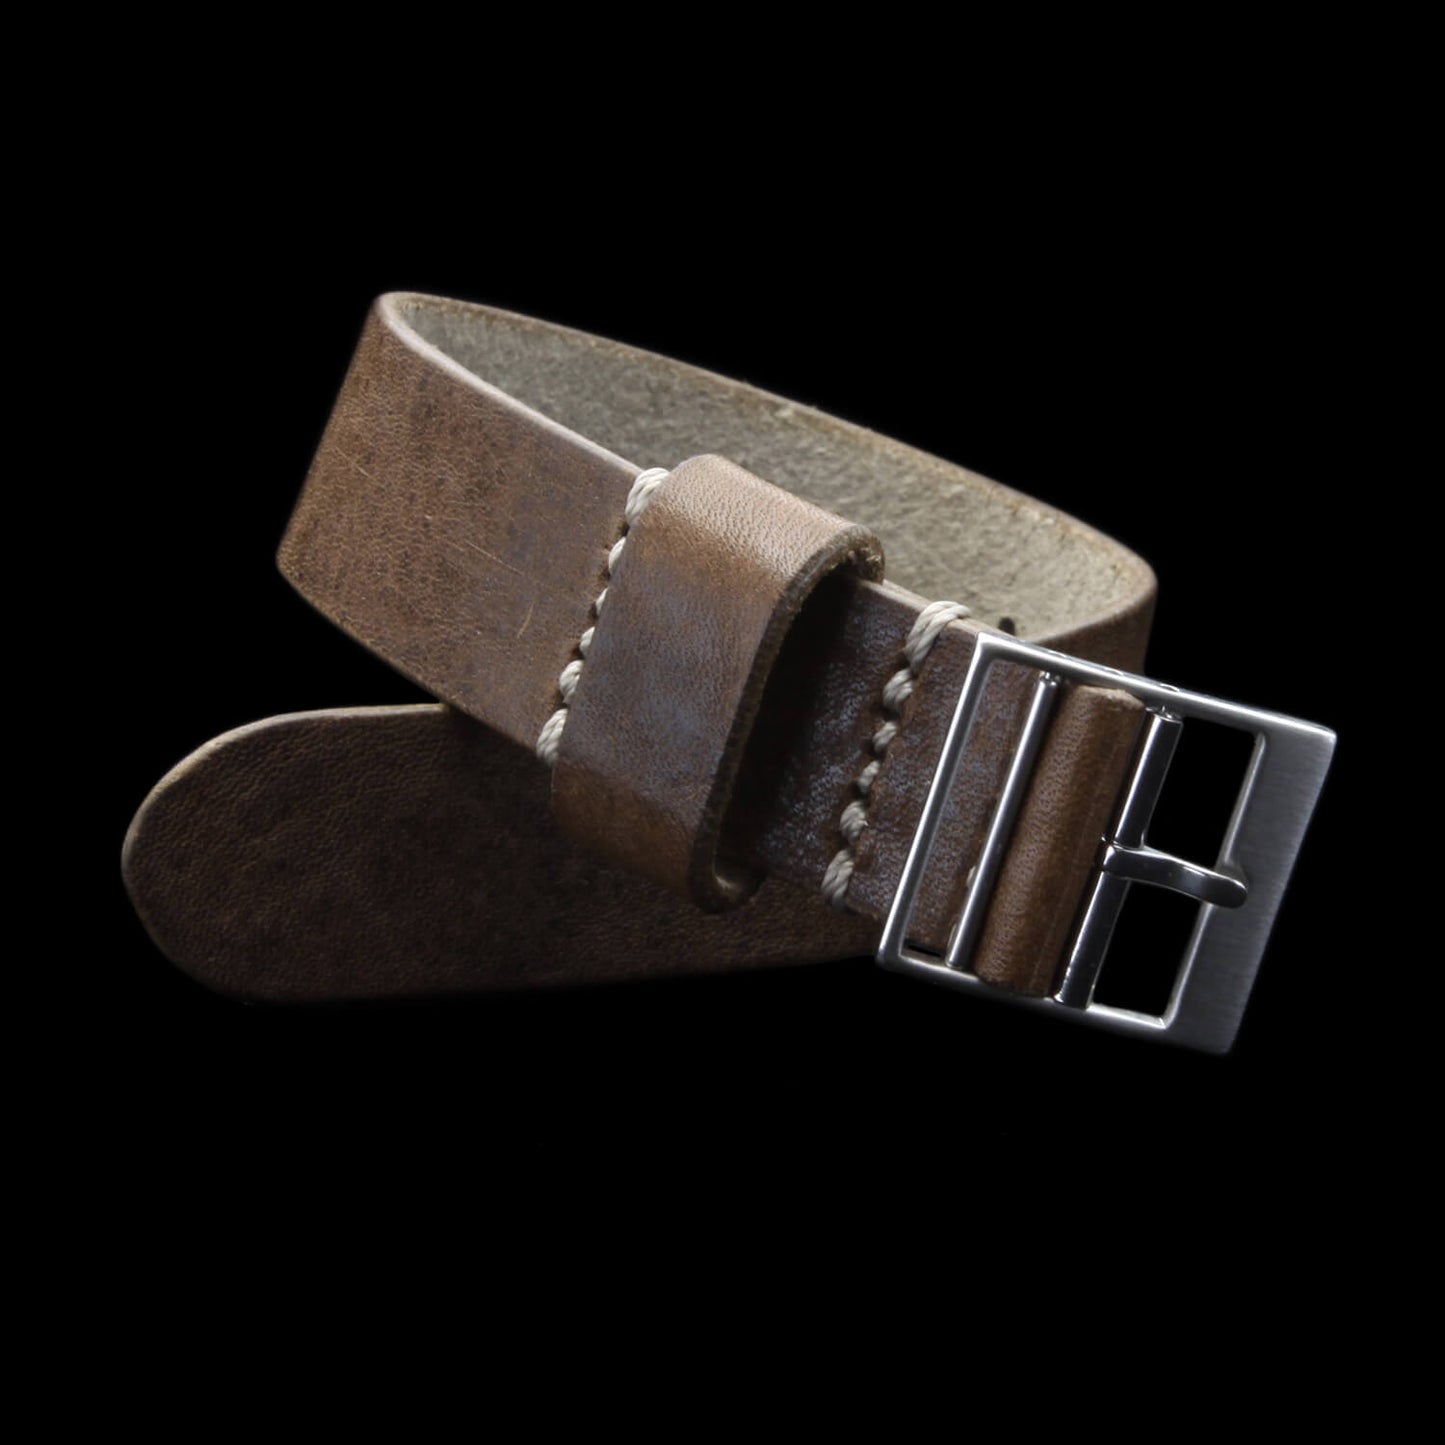 Leather Watch Strap, Classic RAF II Vintage 404 | Ladder Buckle | Full Grain Italian Vegetable-Tanned Leather | Cozy Handmade